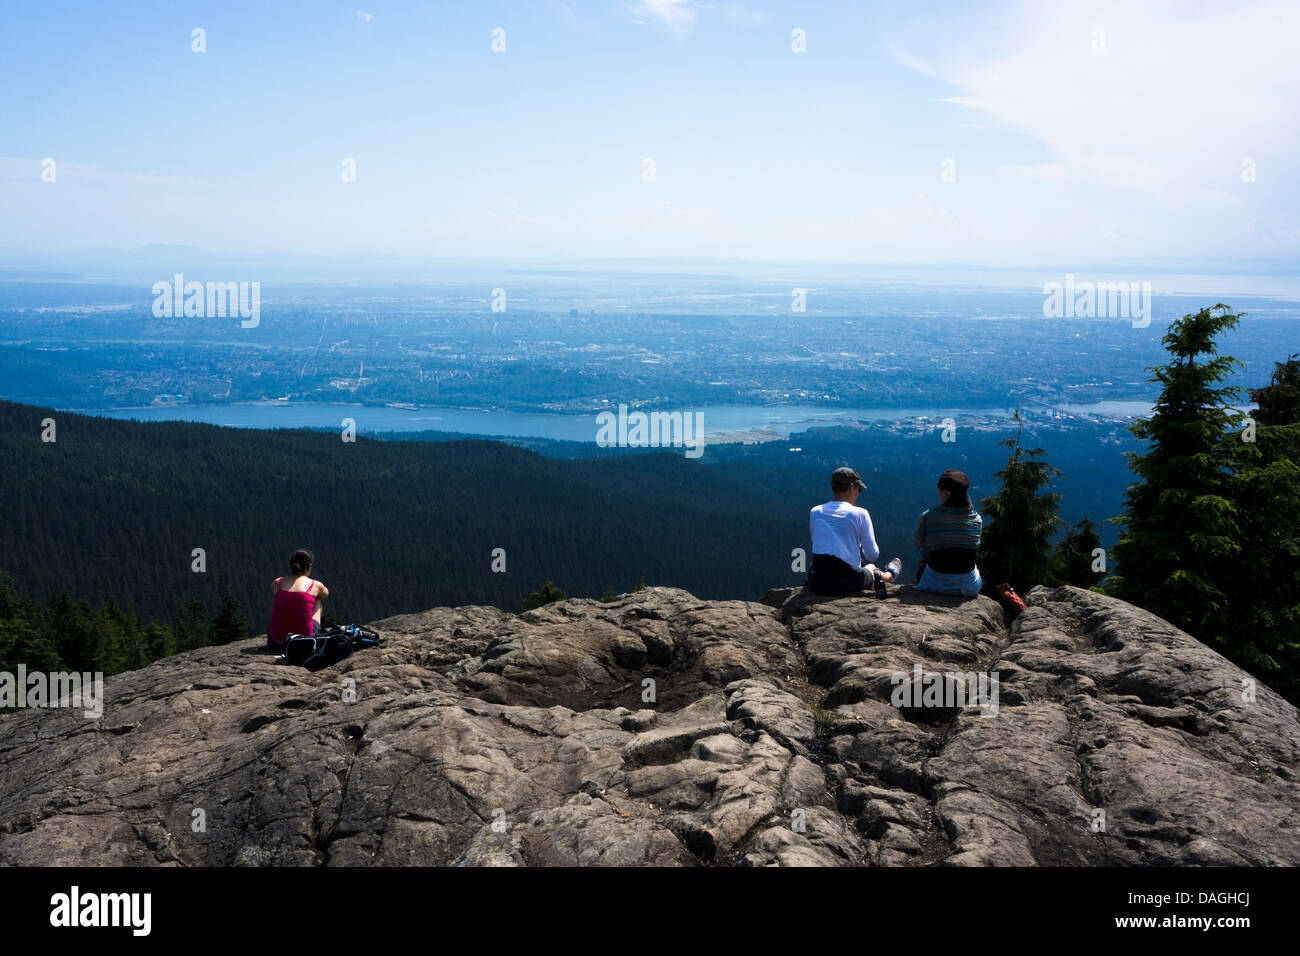 View over Vancouver and BC lower mainland from Dog Mountain in Mount Seymour Provincial Park, North Vancouver, BC, Canada Stock Photo